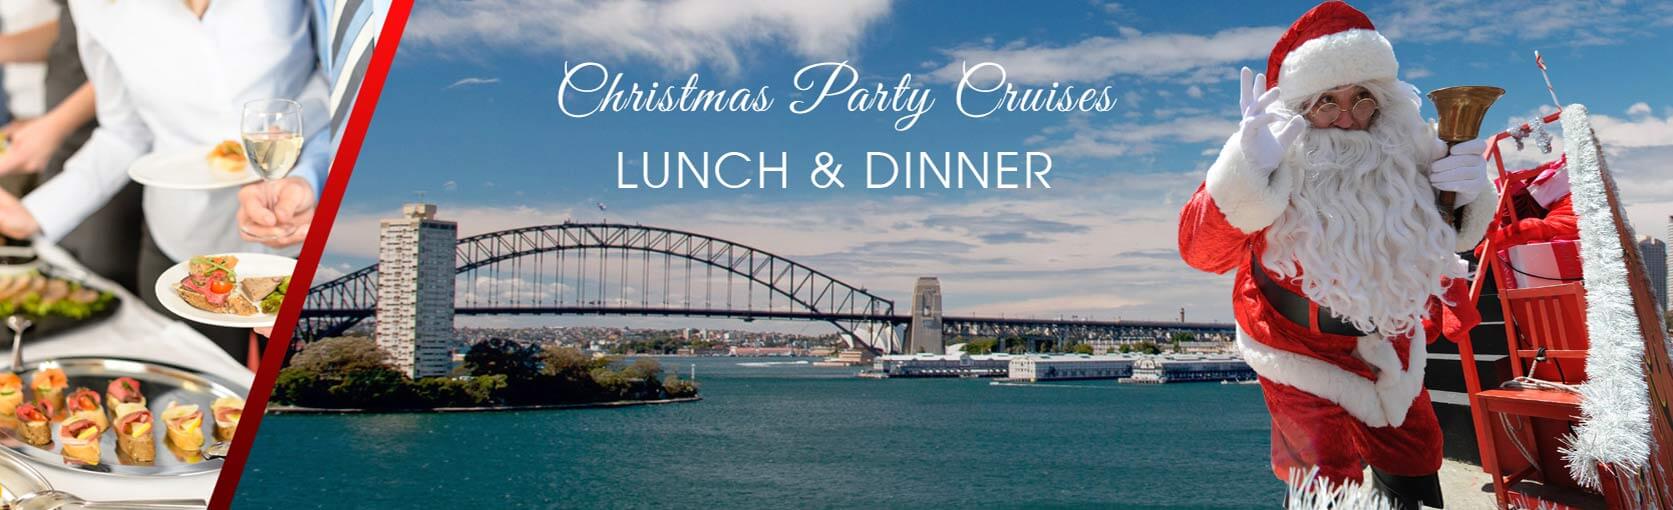 cruise from sydney christmas